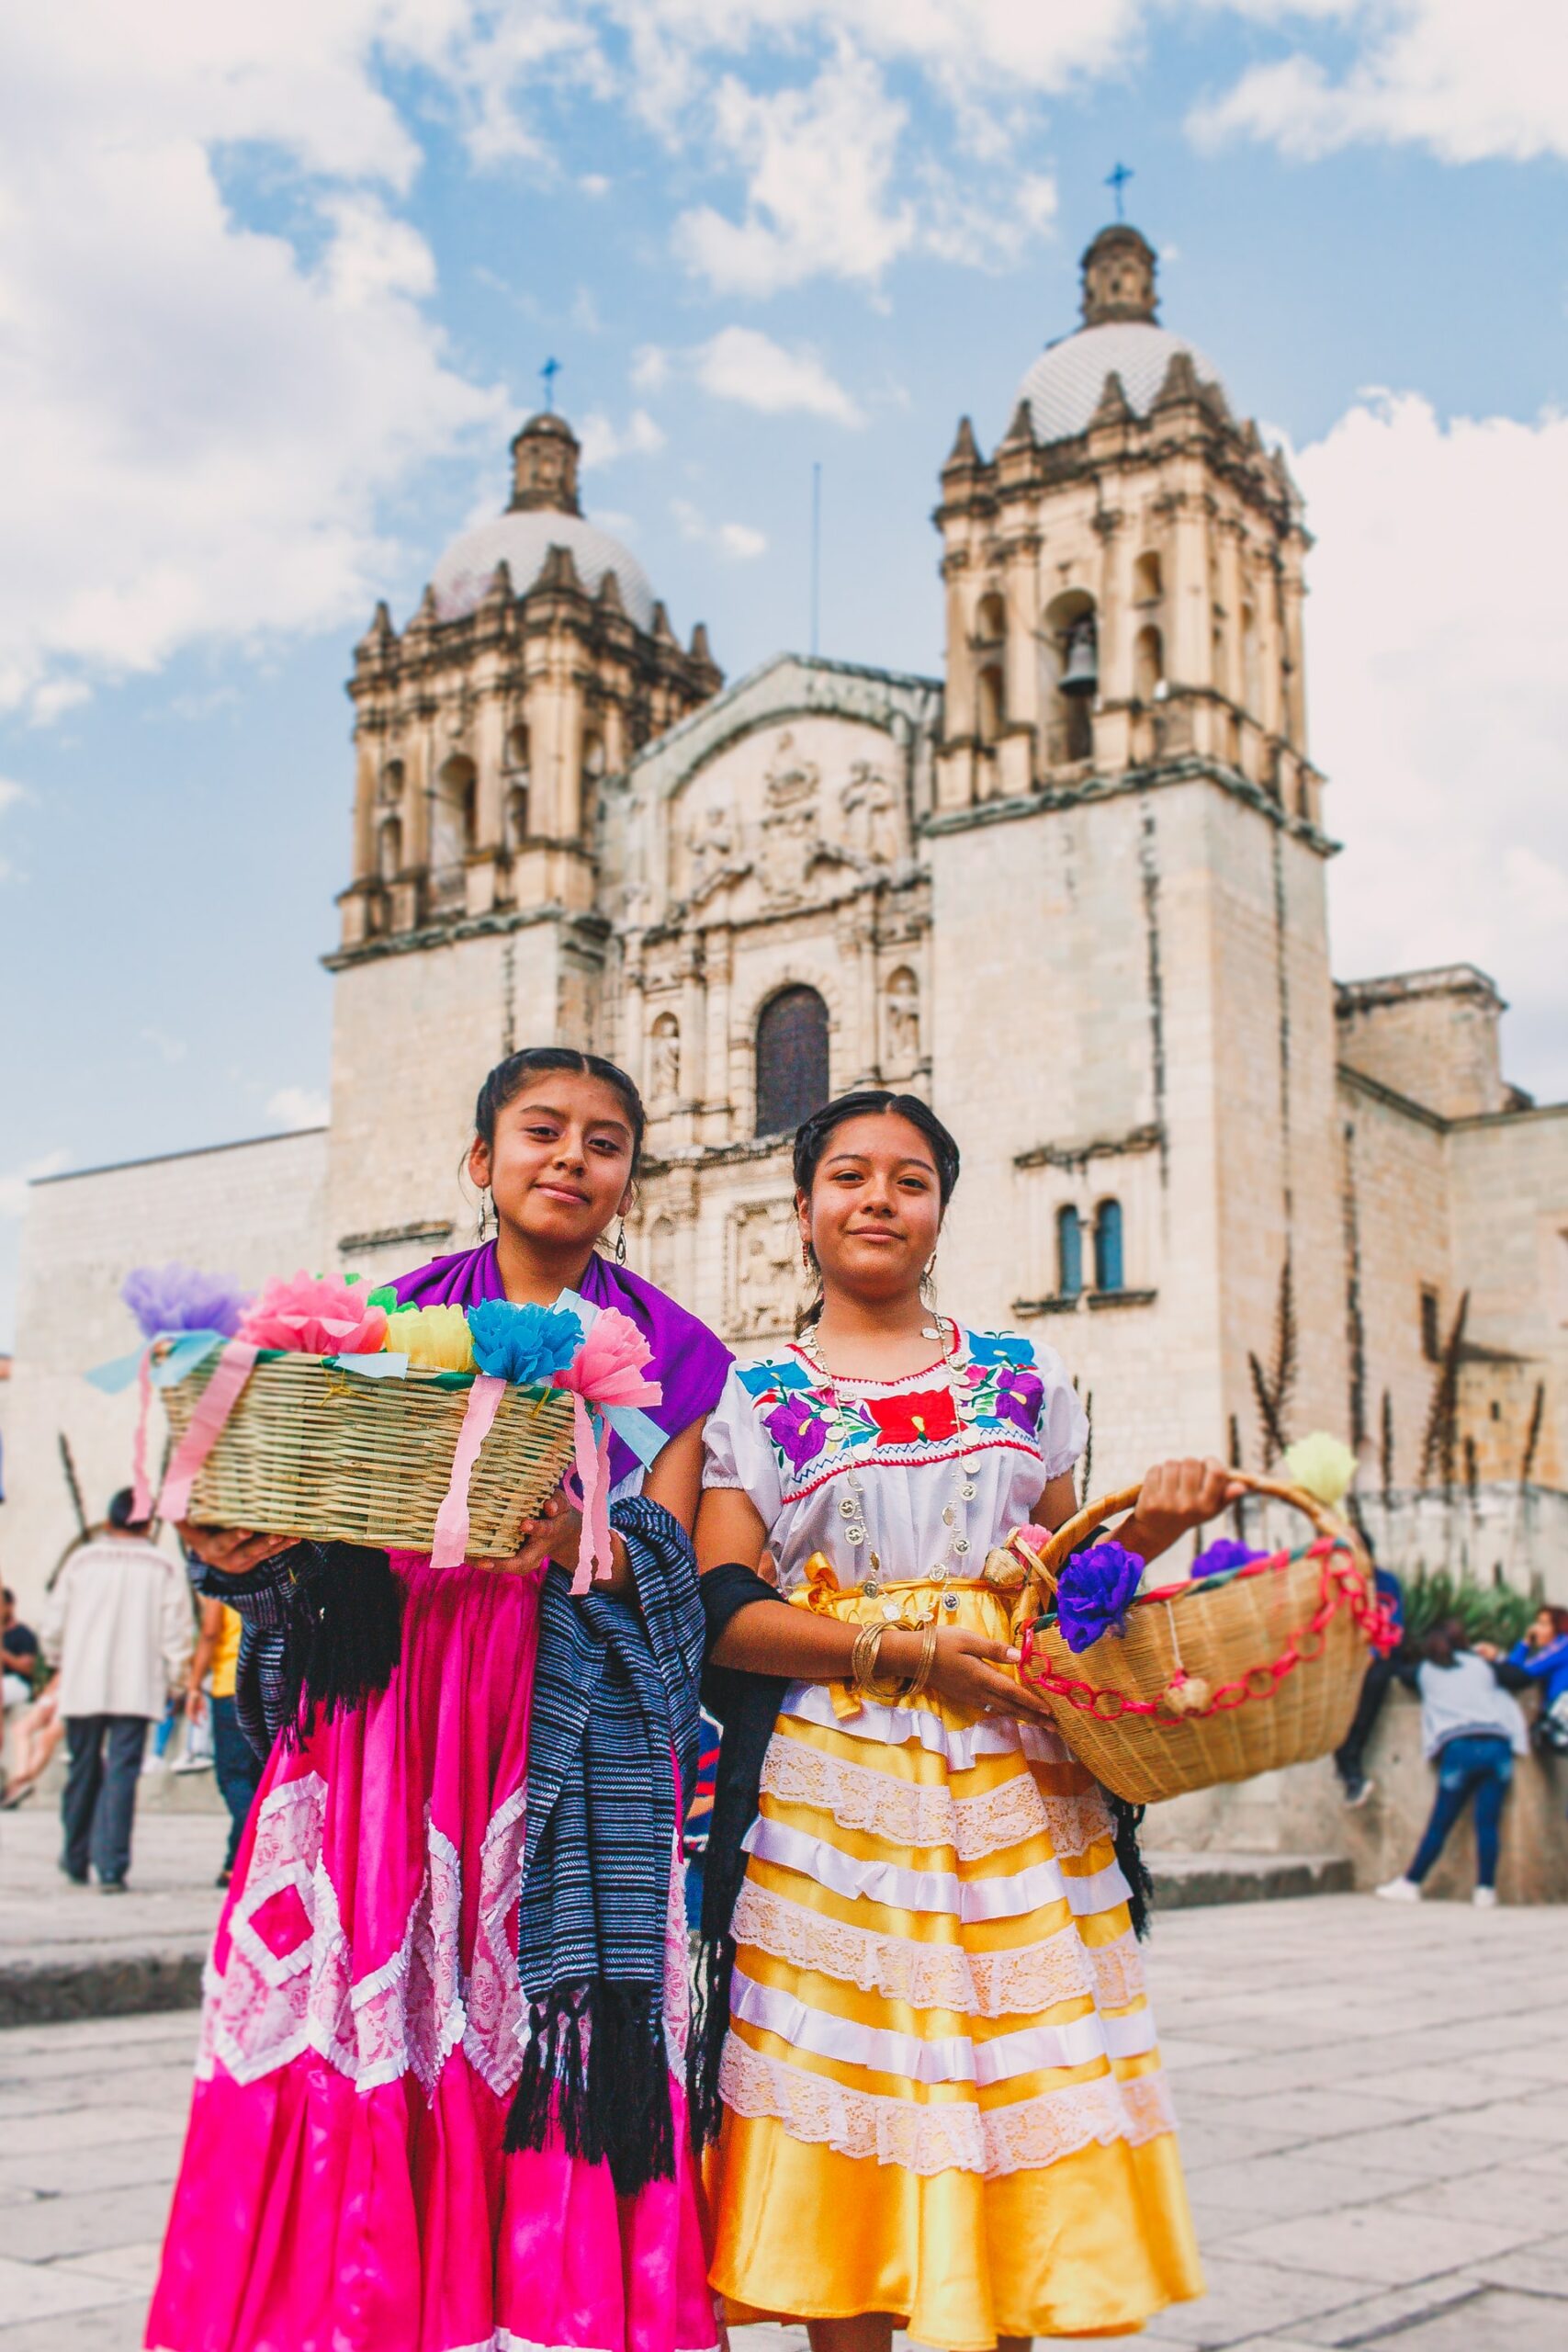 Is Oaxaca Safe? What You Need to Know As a Solo Traveler